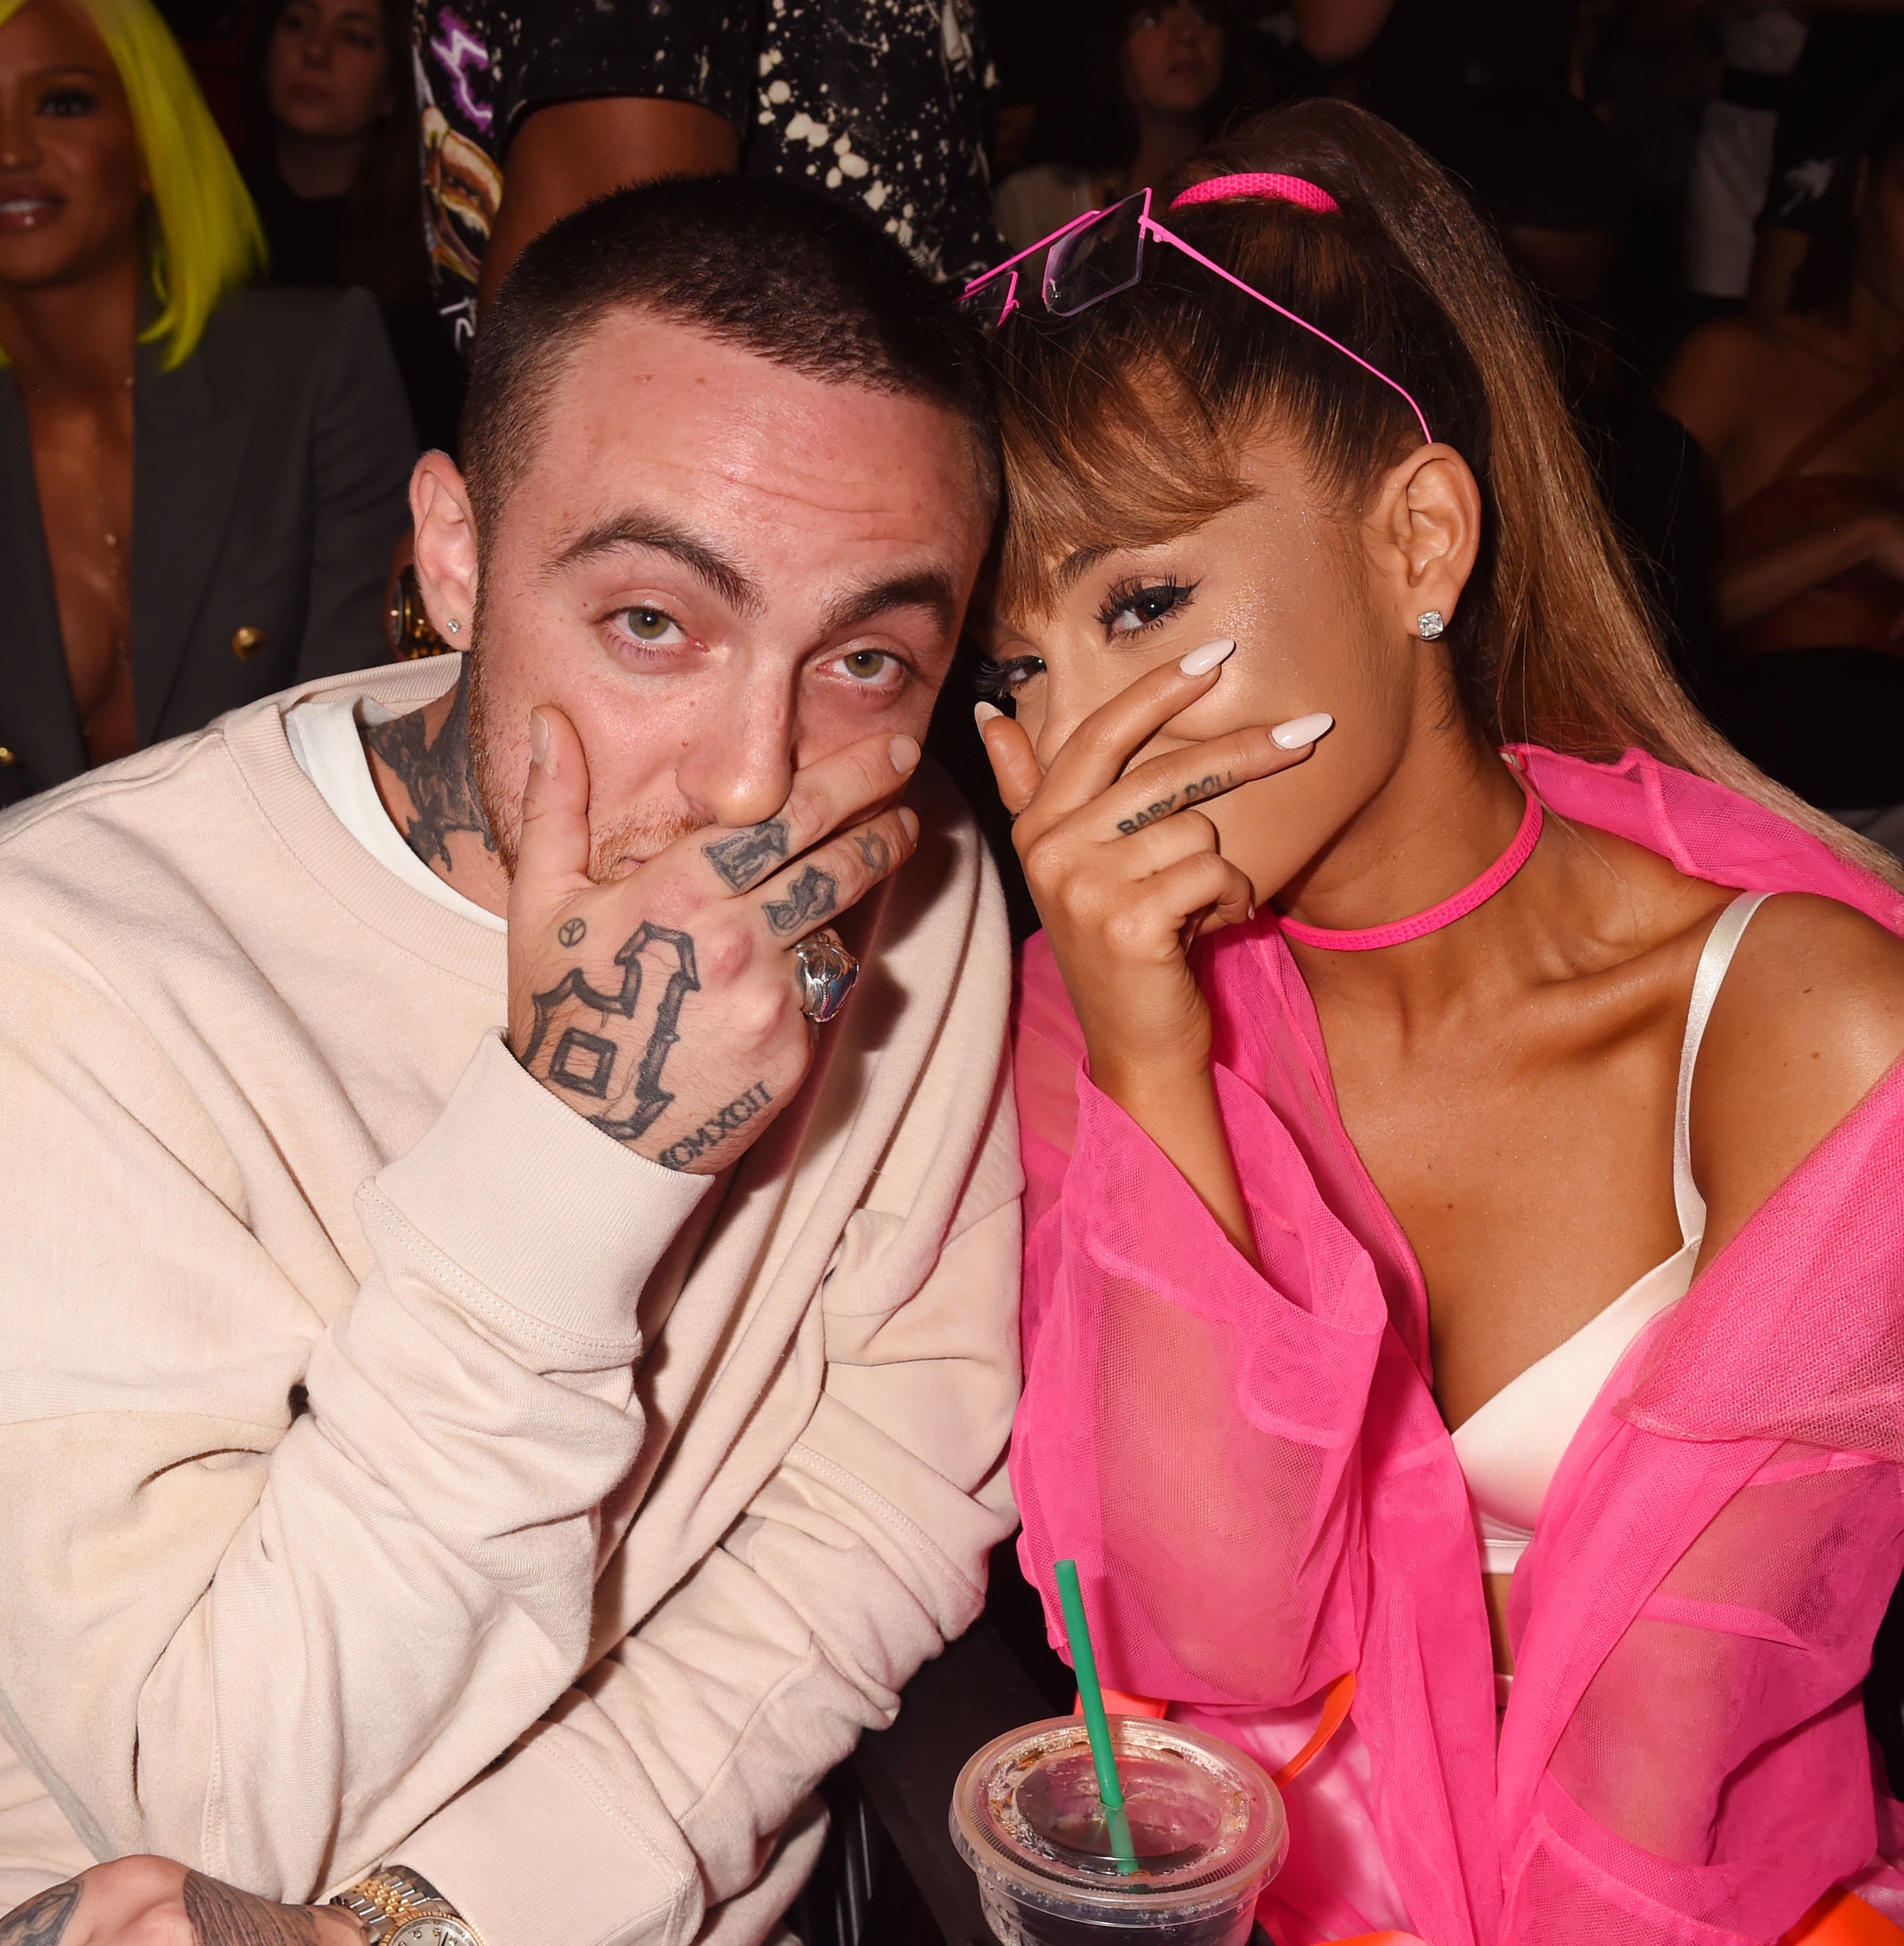 Mac and Ariana sitting together and posing by covering half their face